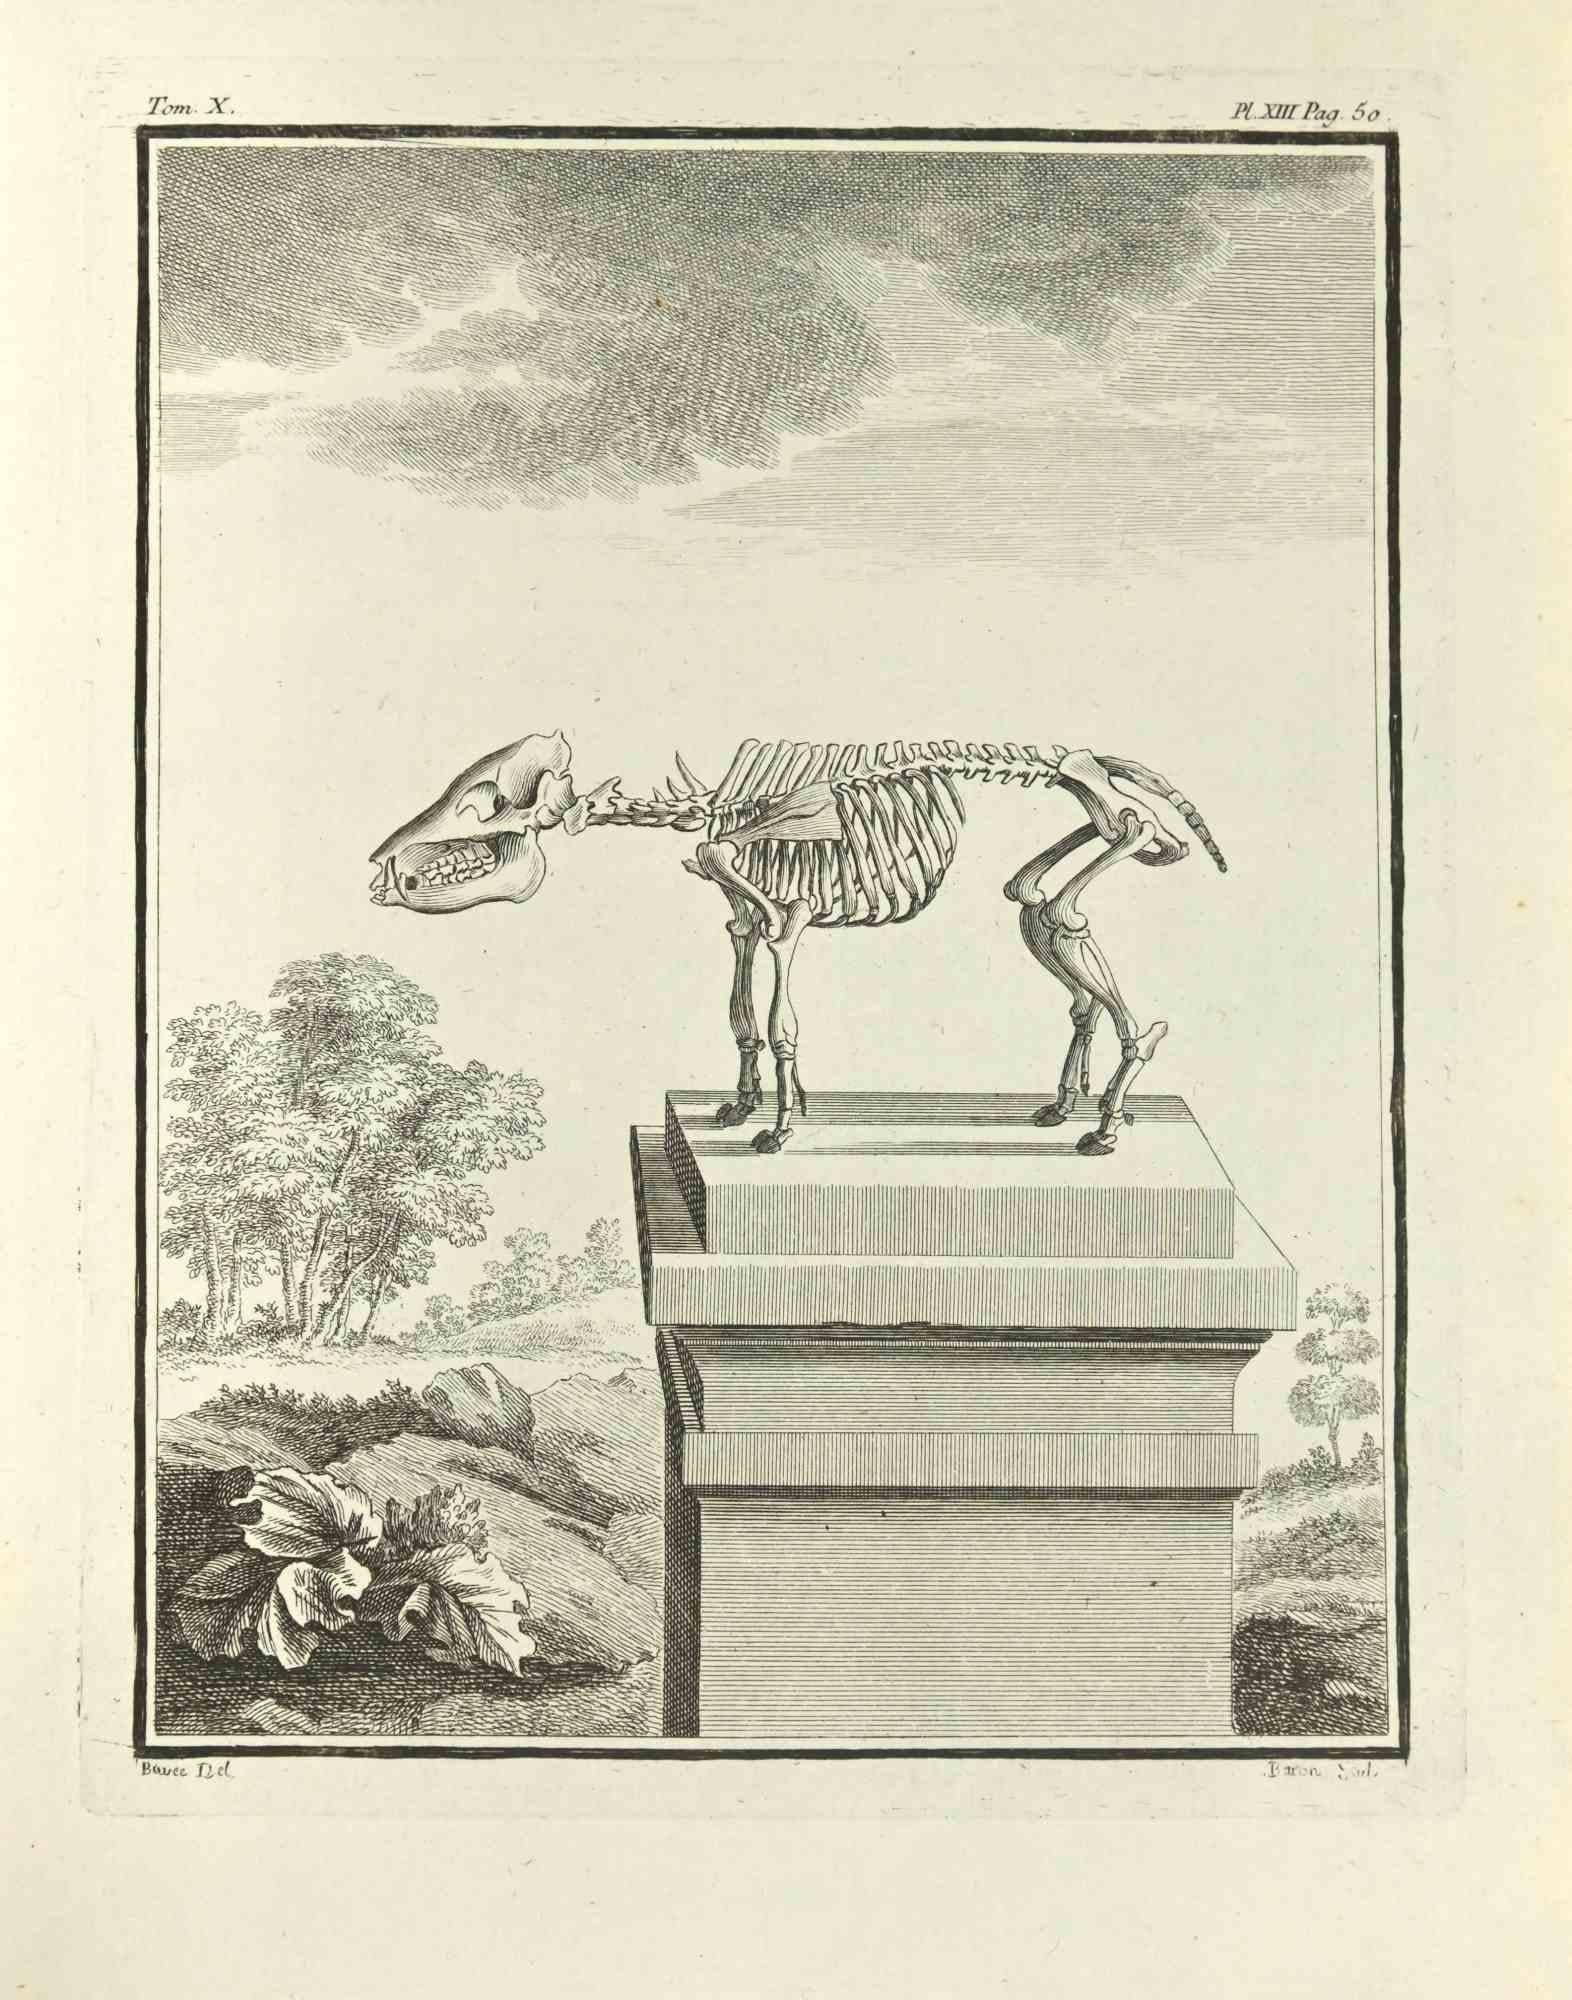 The Skeleton is an etching realized by Jacques Baron in 1771.

It belongs to the suite "Histoire Naturelle de Buffon".

The Artist's signature is engraved lower right.

Good conditions